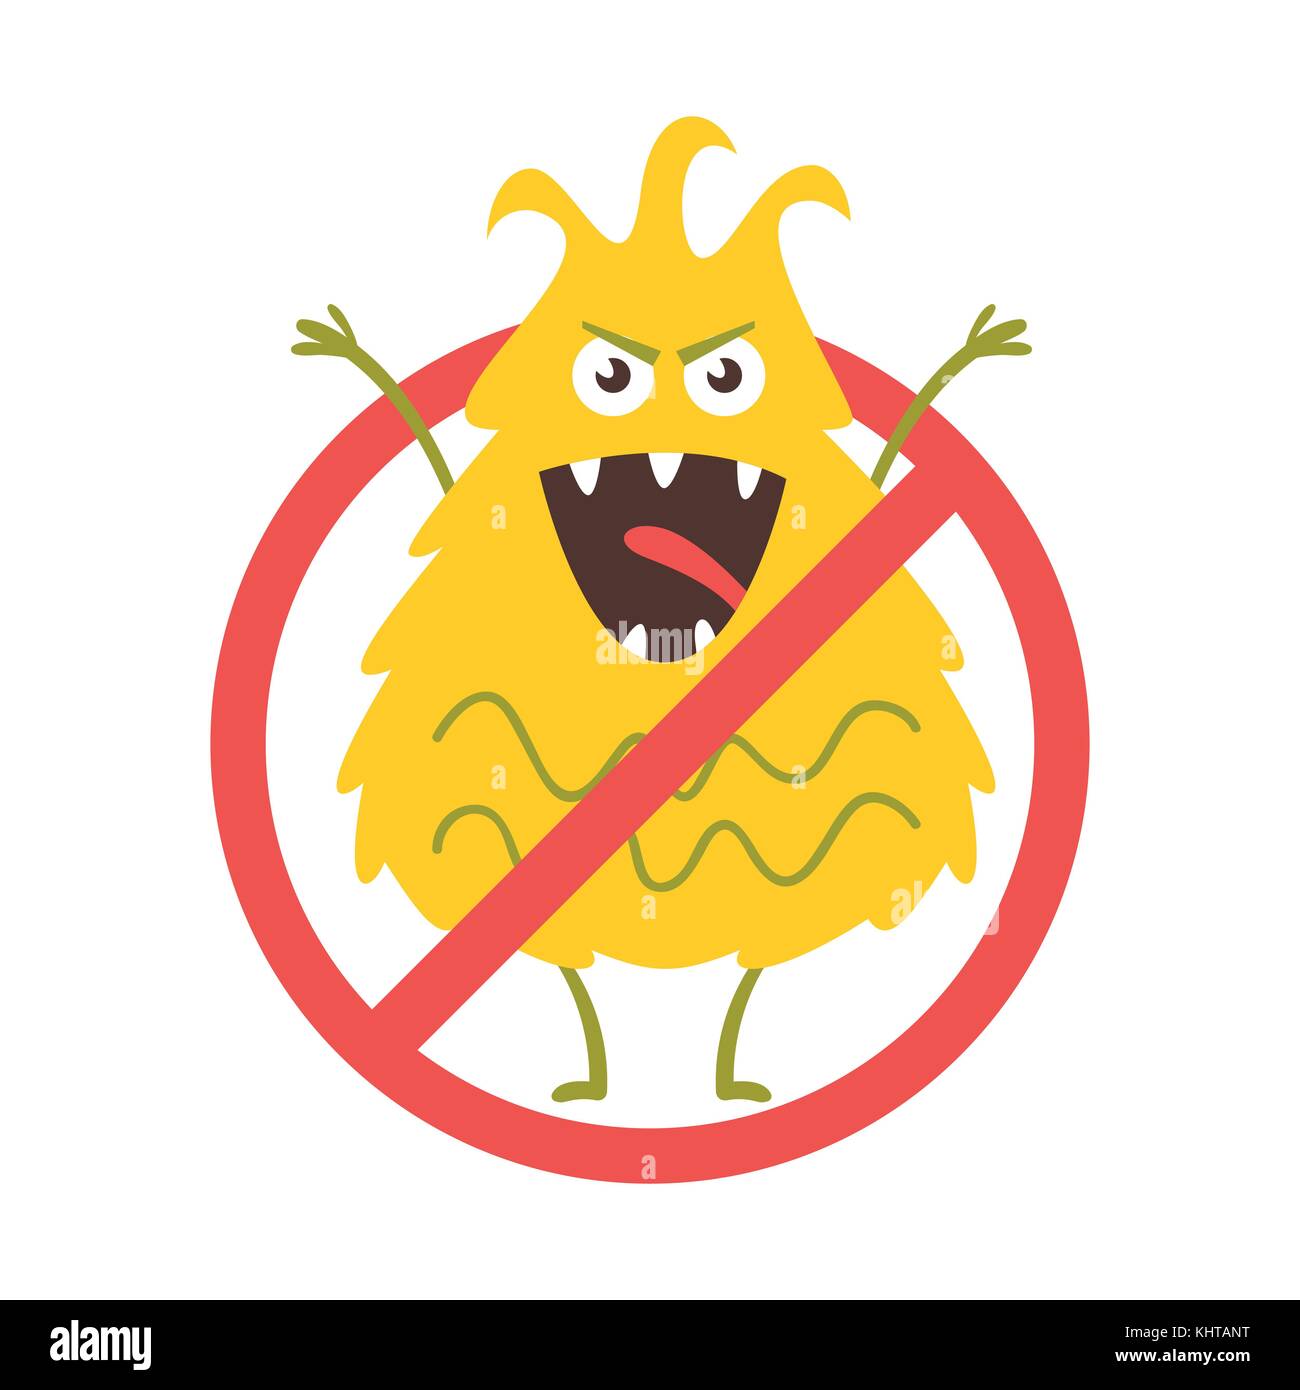 Vector cartoon style illustration of colorful funny bacteria character. Stop bacteria sign. Bad flora microbes. Isolated on white background. Stock Vector